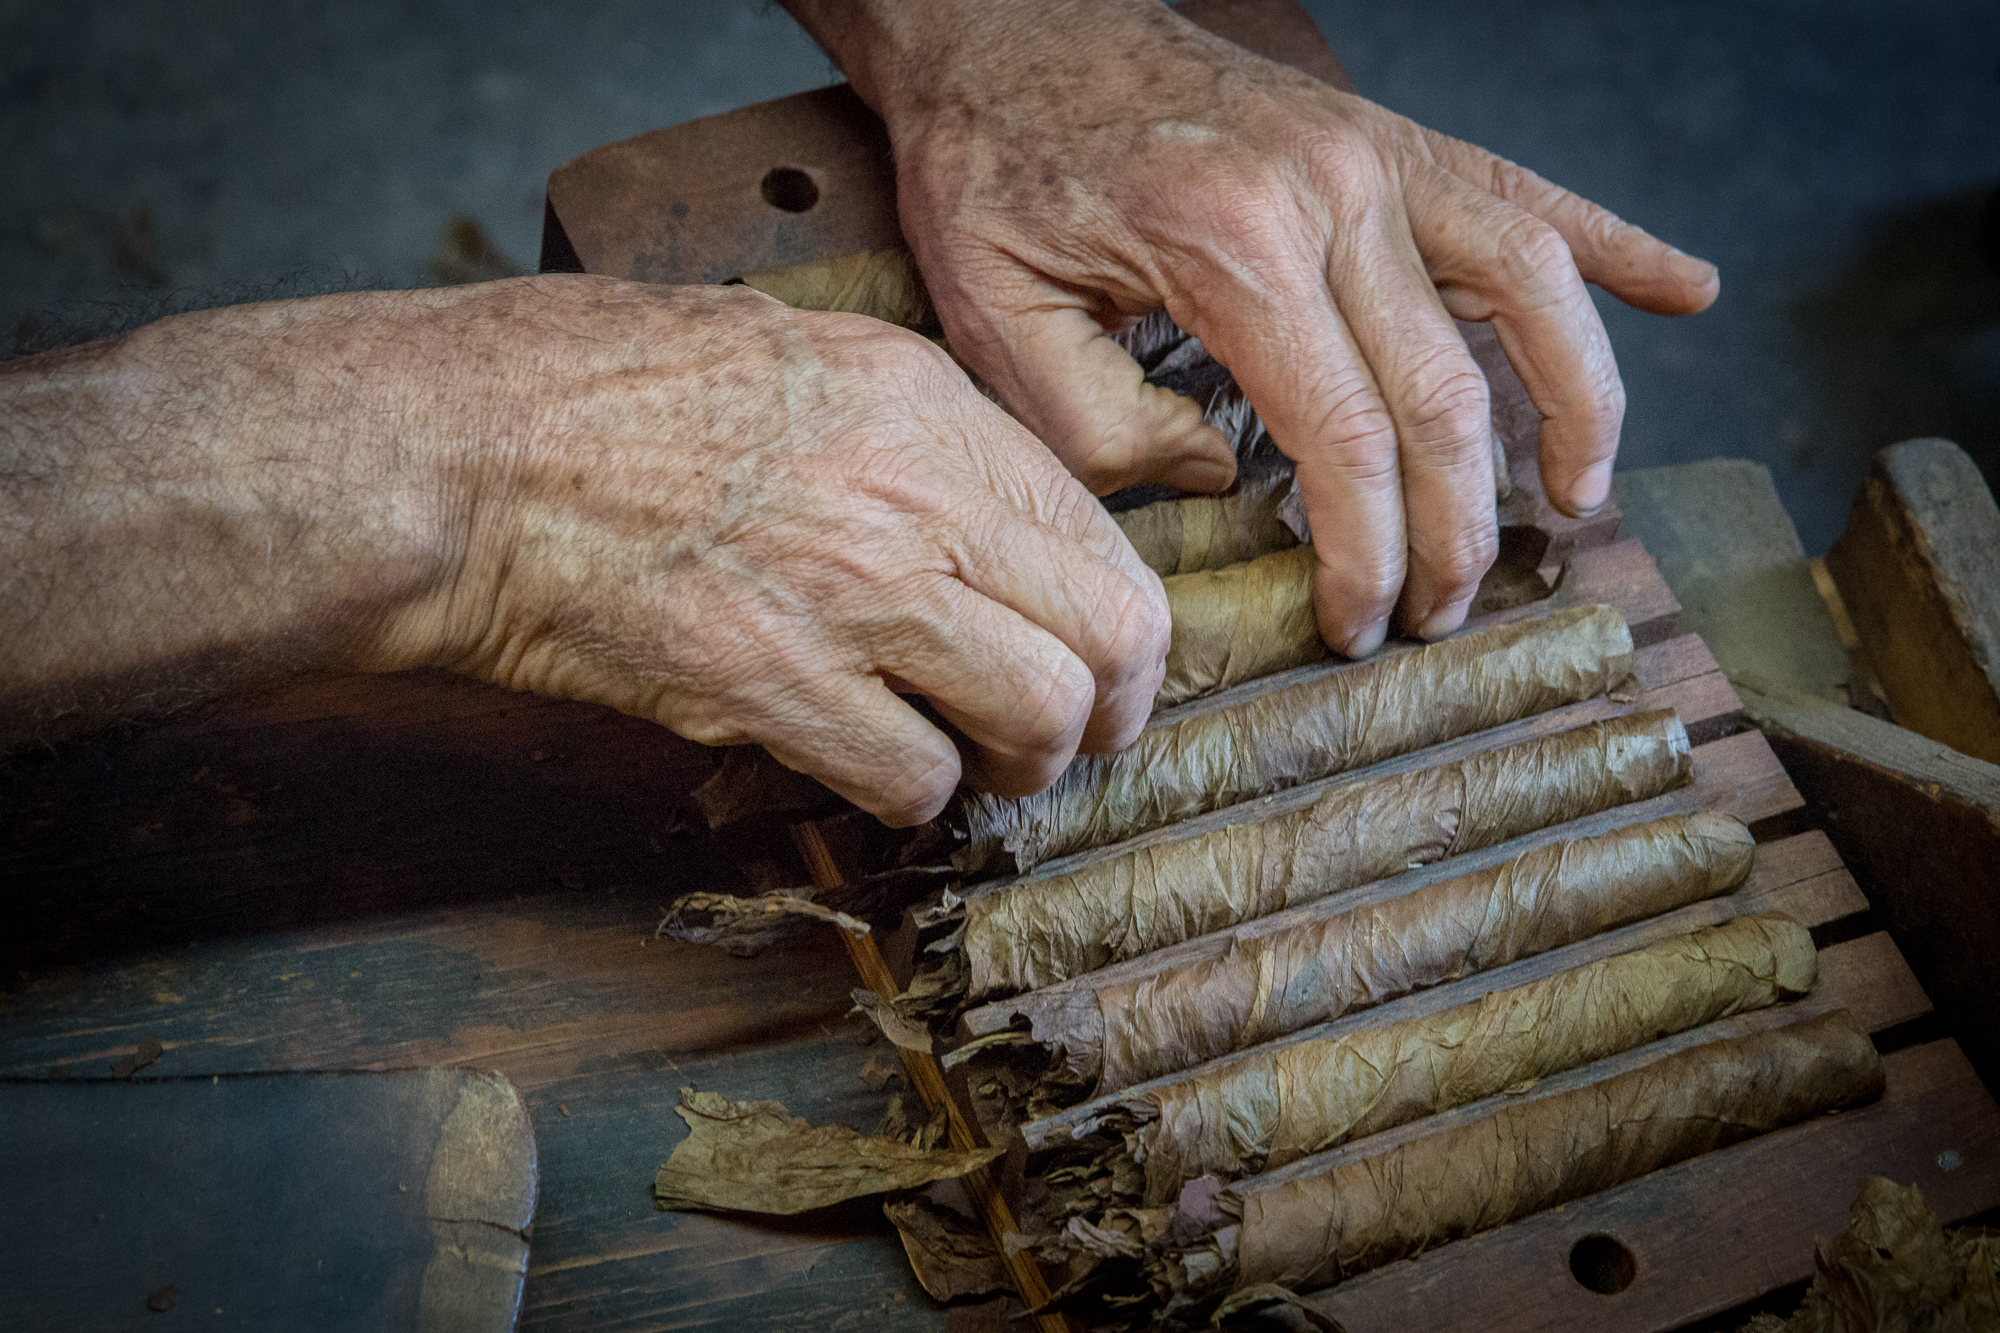 Cigar Rolling Hands By Kim Bybjerg LRPS (The Netherlands)